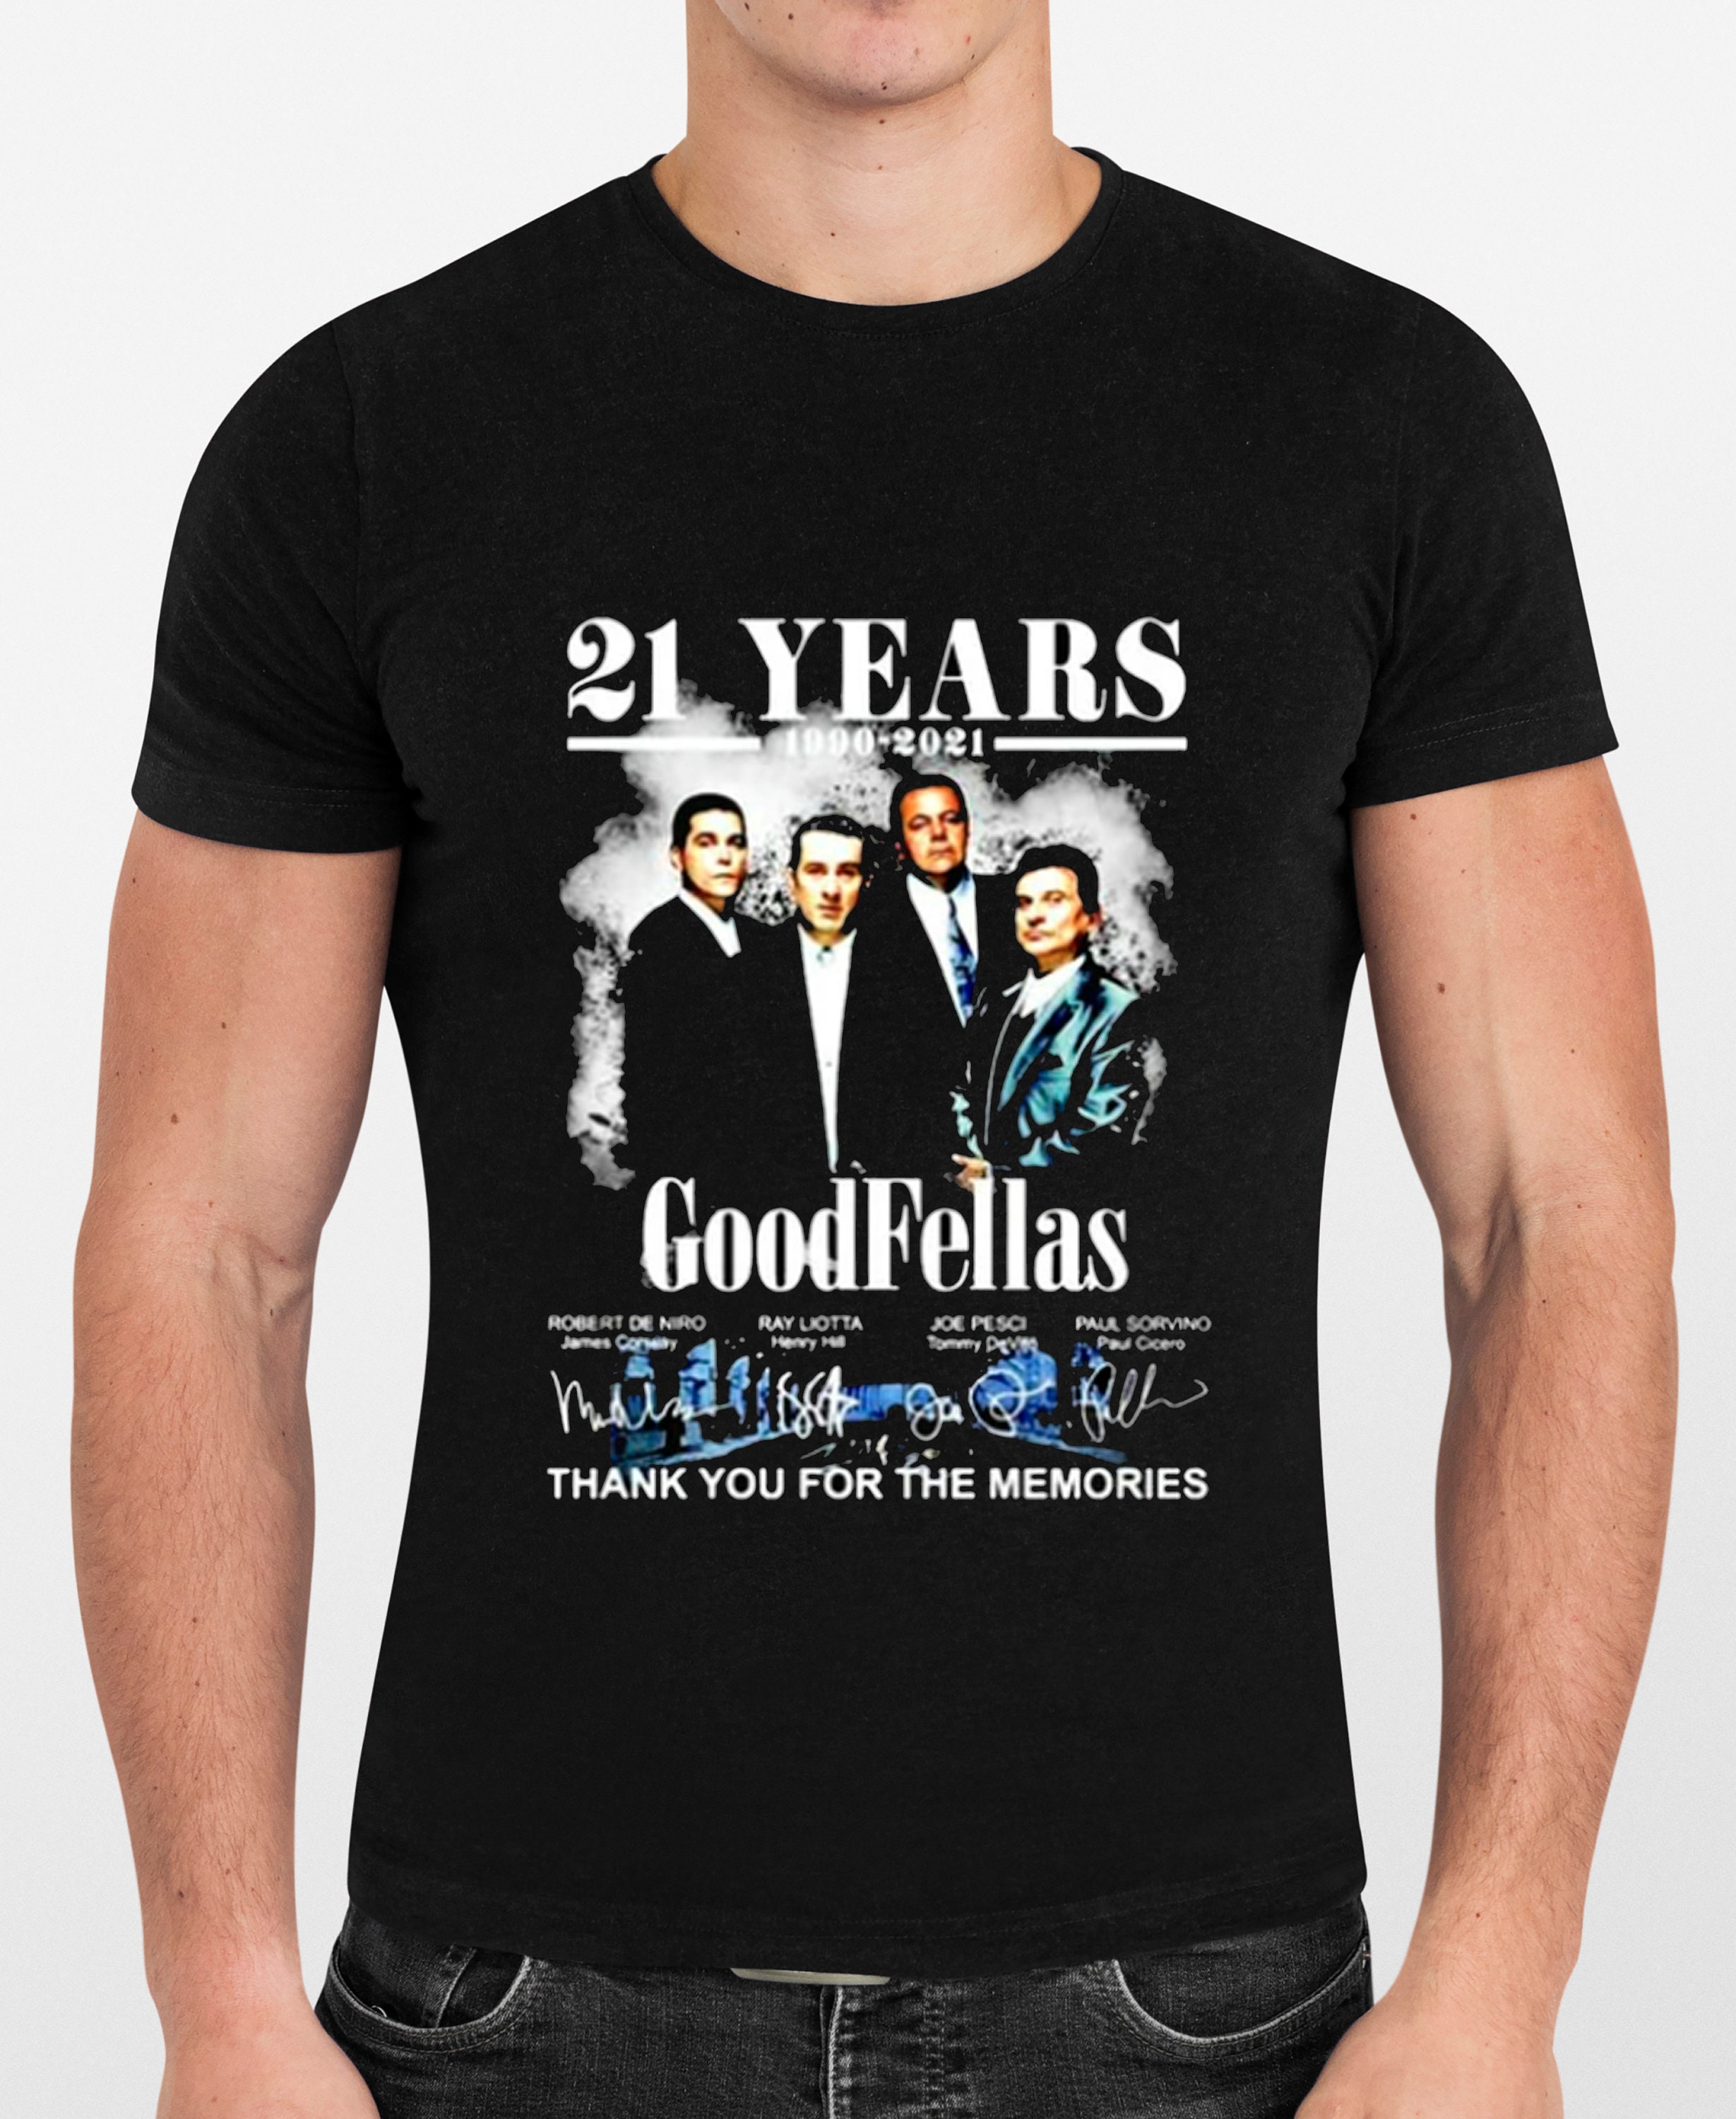 21 Years 1990-2021 Goodfellas Thank You For The Memories Unisex T-Shirt